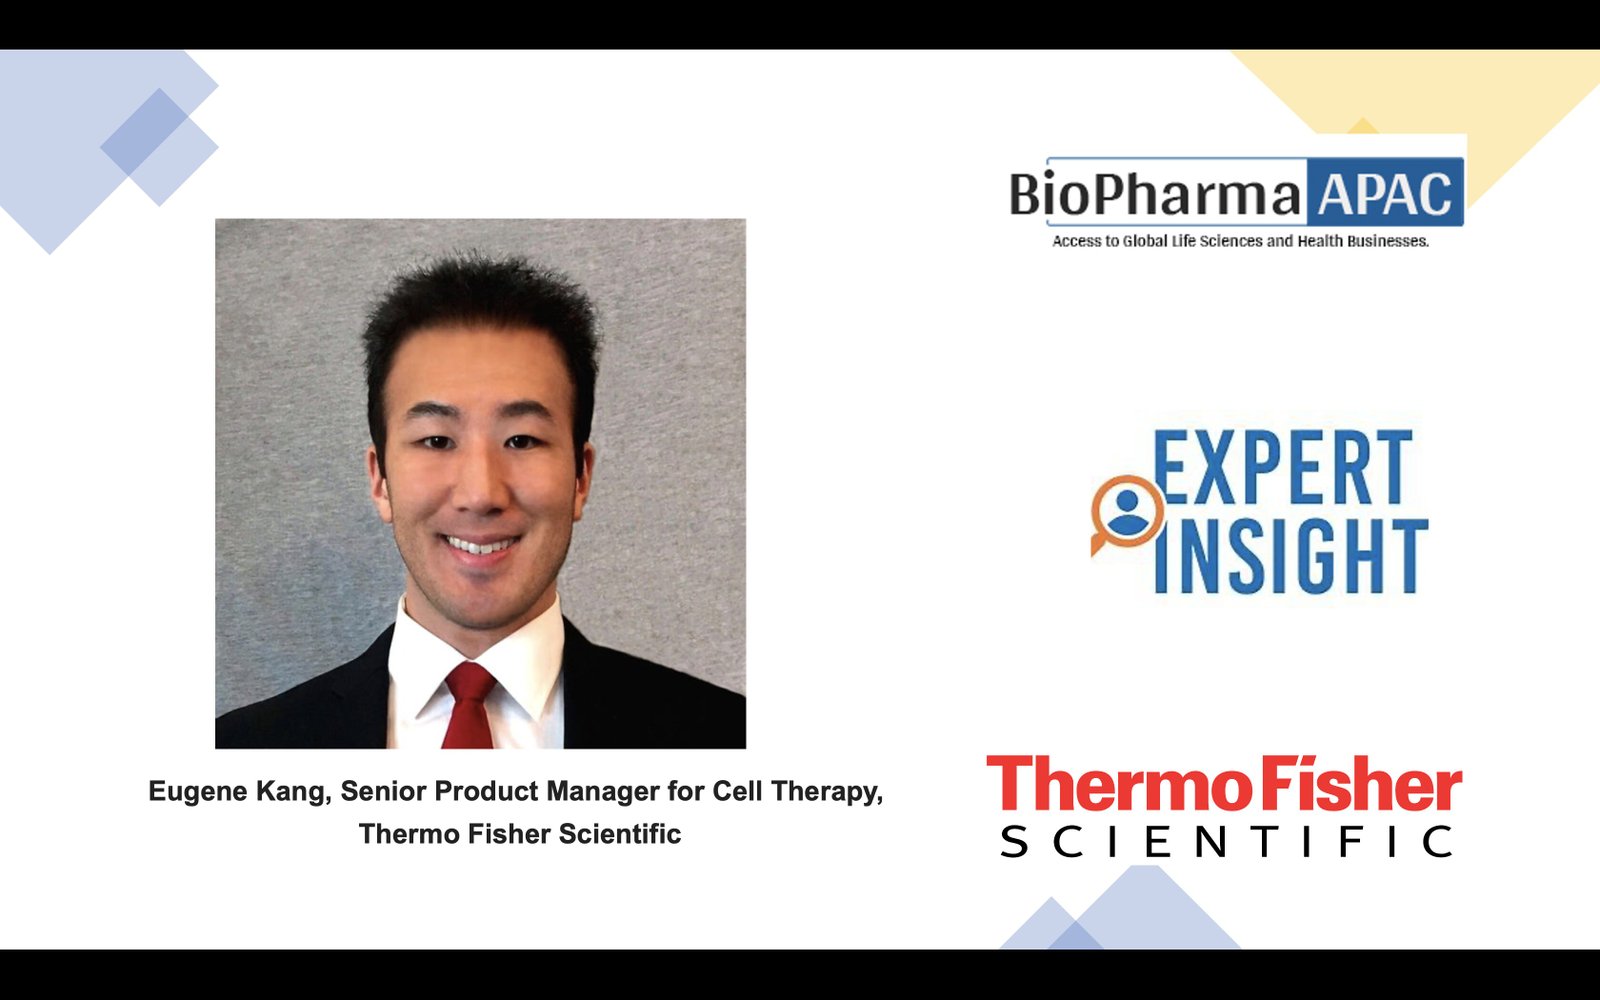 Eugene Kang, Senior Product Manager for Cell Therapy at Thermo Fisher Scientific